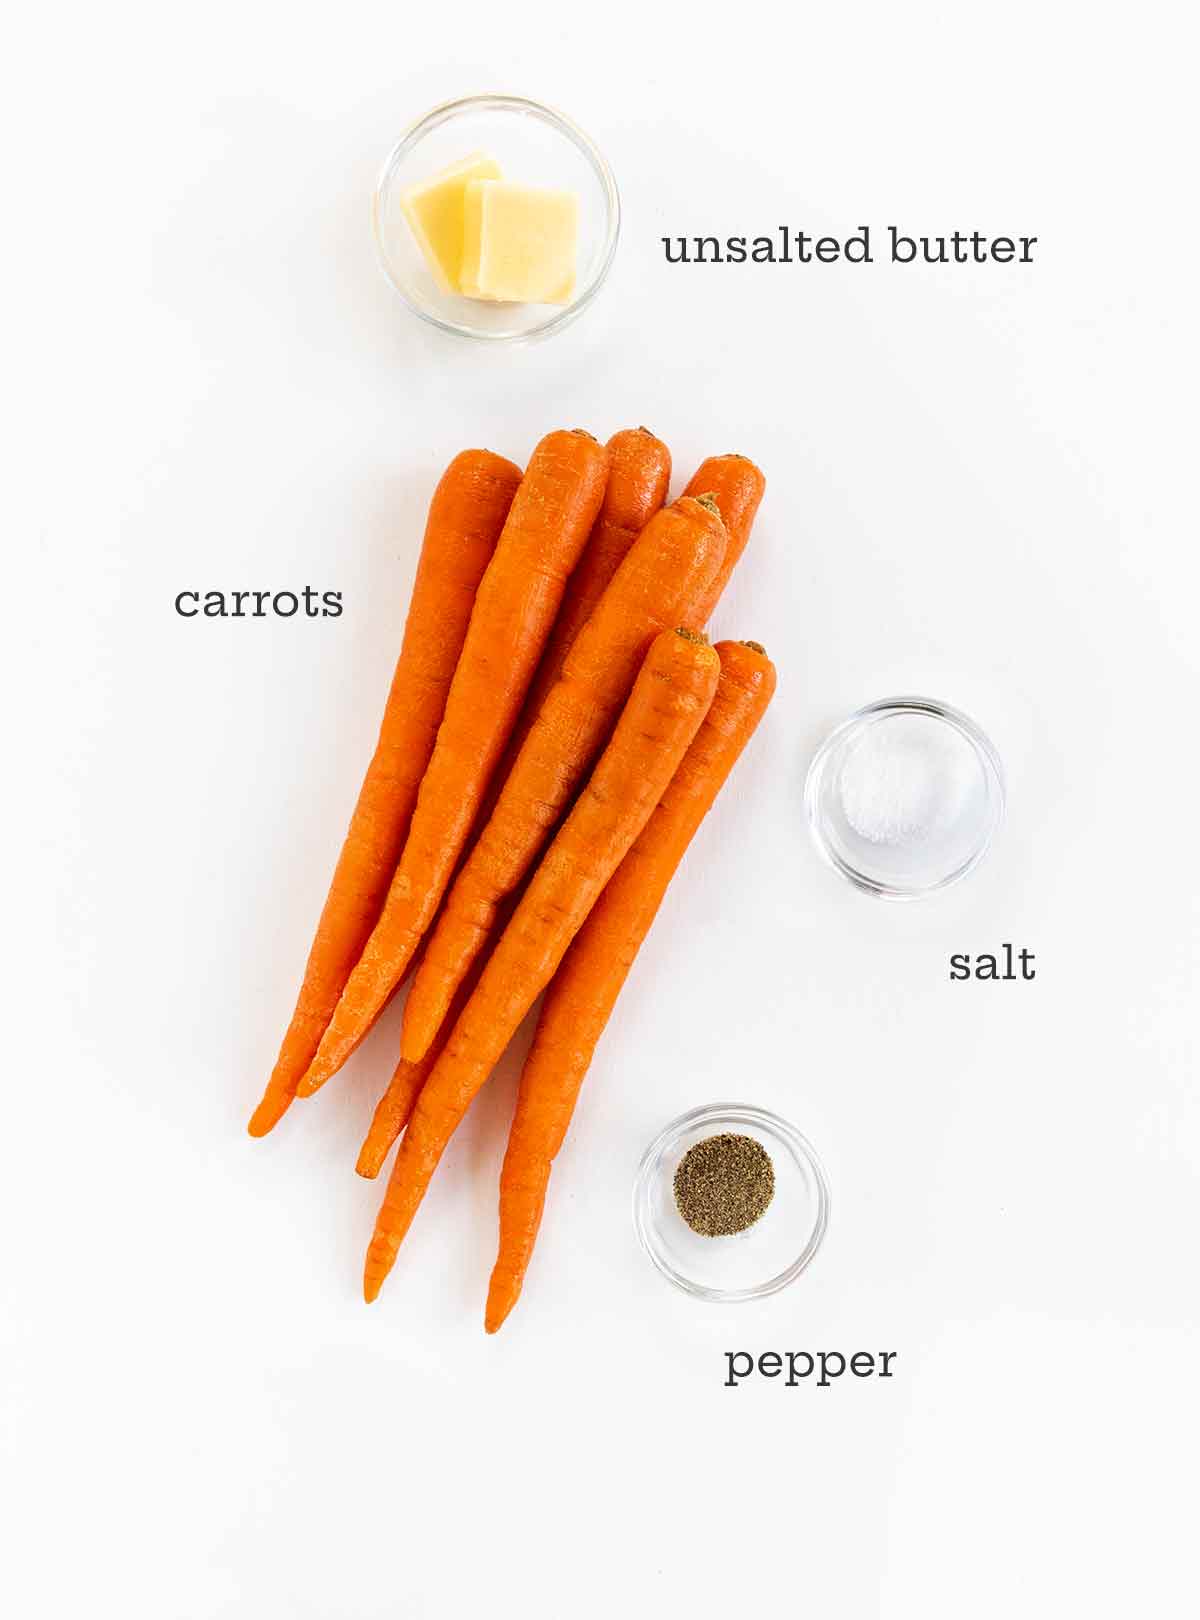 Ingredients for roasted carrots -- carrots, butter, salt, and pepper.